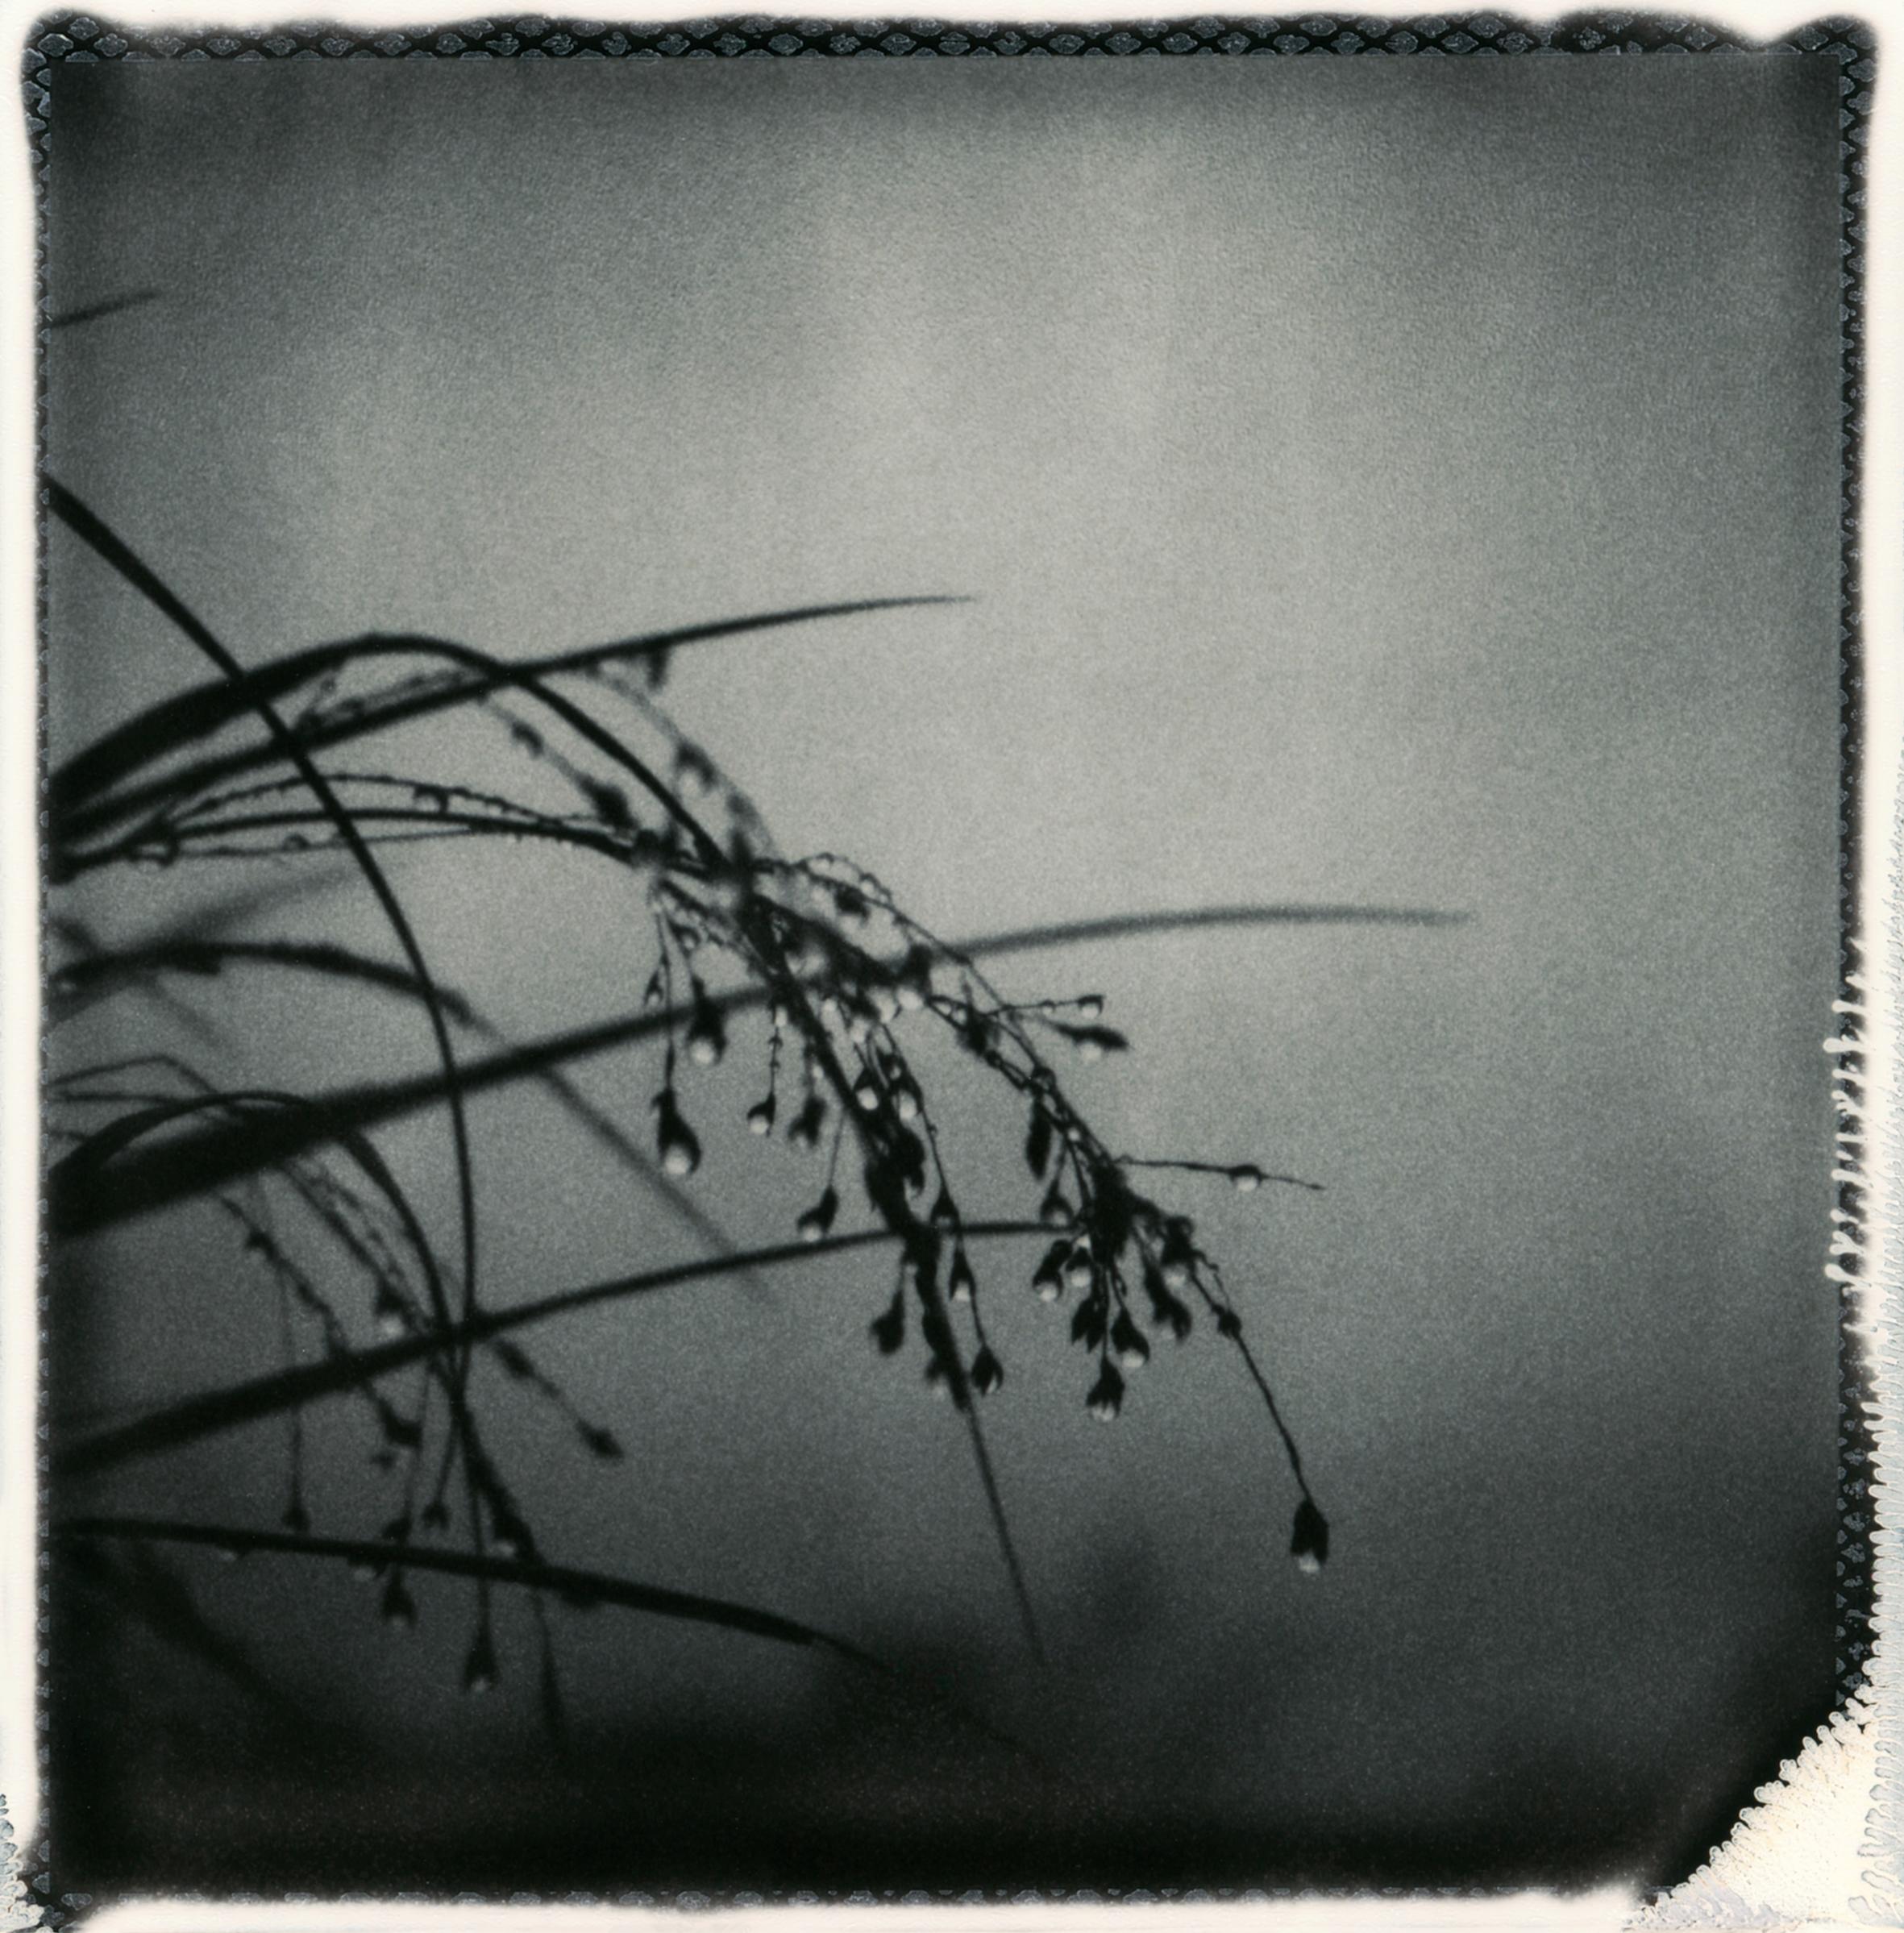 October rain - Polaroid black and white floral photography, Limited edition 20